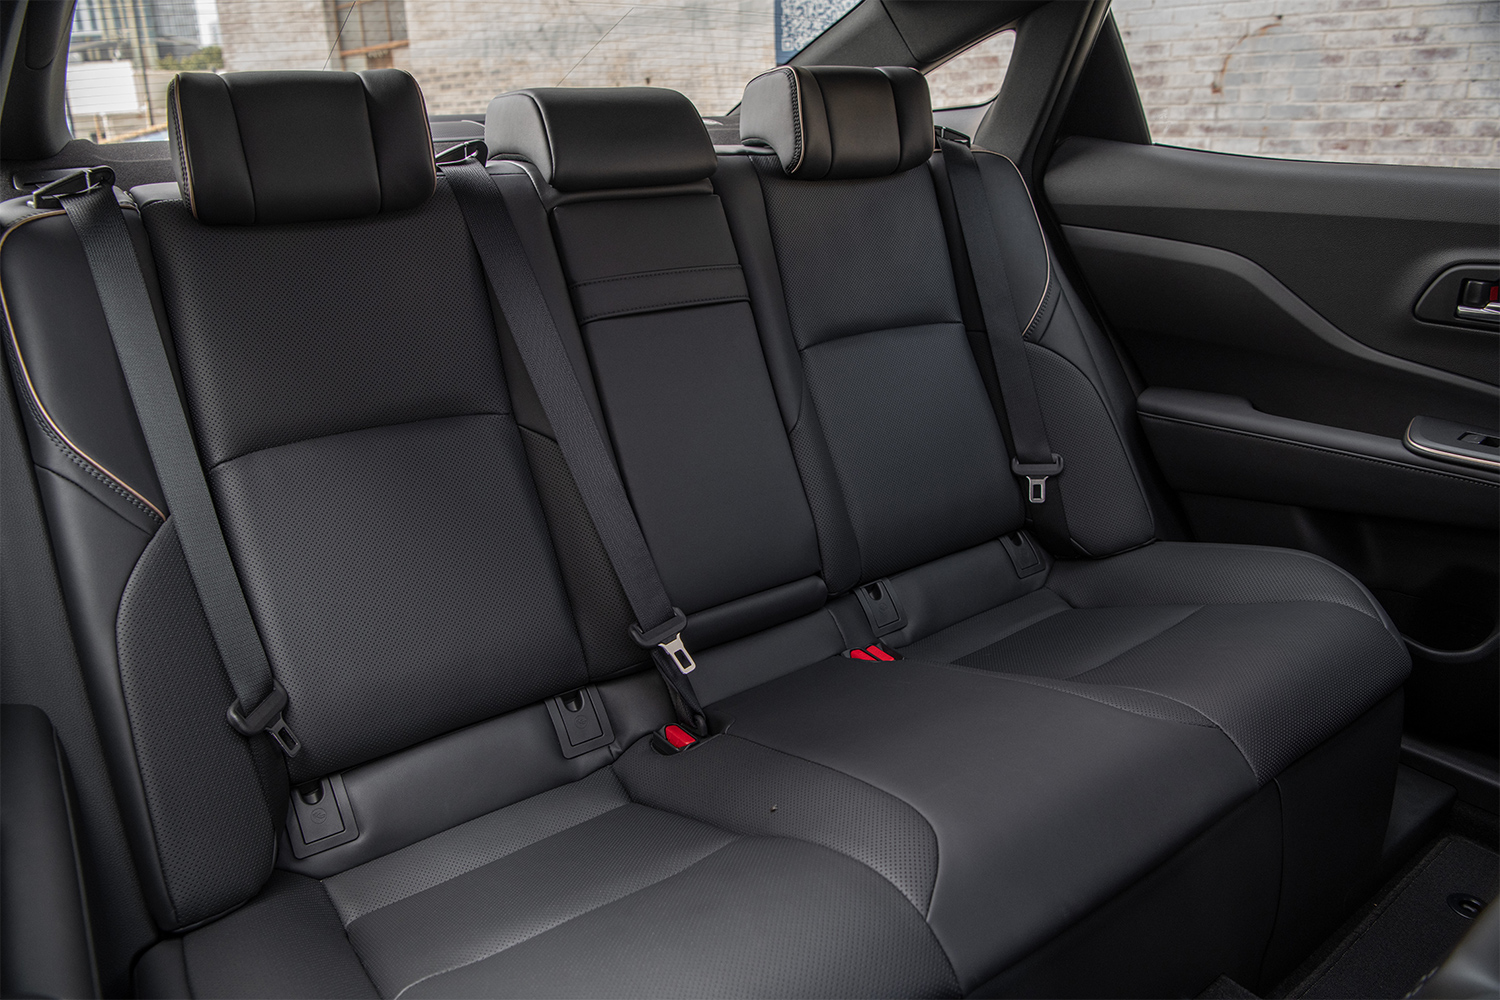 The rear seats in the Toyota Crown, which all fold down